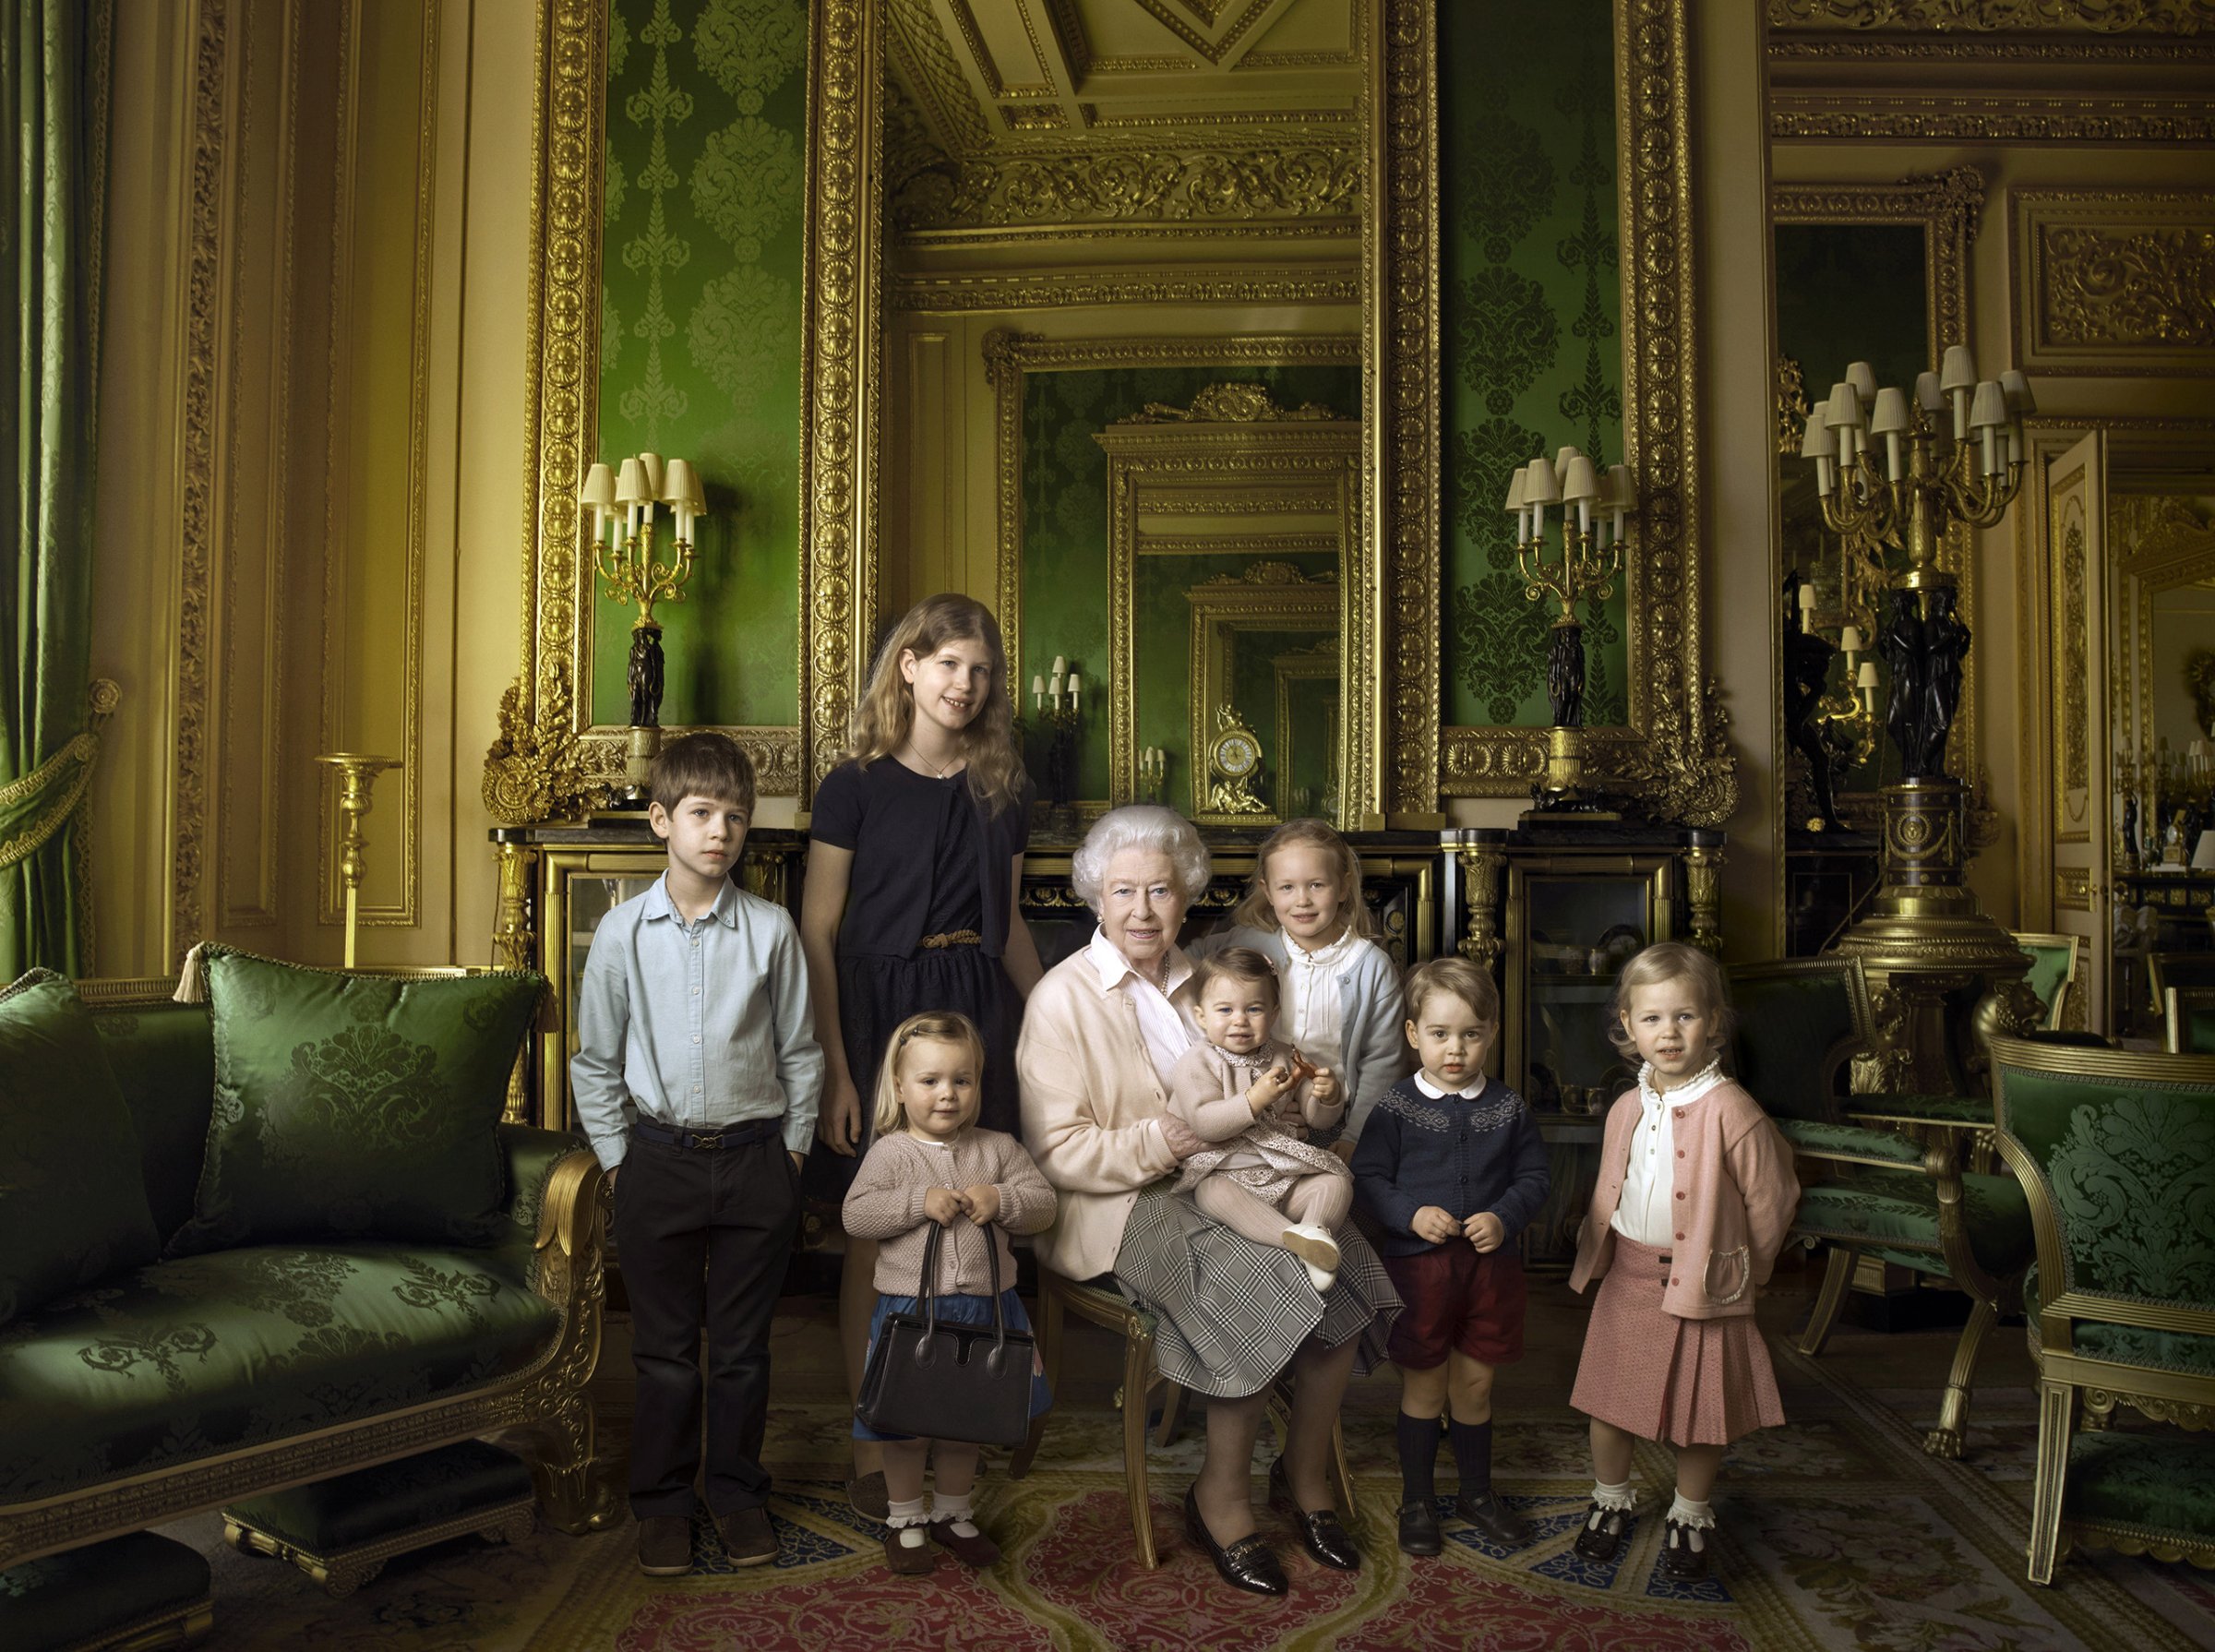 This official photograph released by Buckingham Palace to mark Queen Elizabeth II's 90th birthday shows her five great-grandchildren and her two youngest grandchildren in the Green Drawing Room, part of Windsor Castle's semi-State apartments, April 20, 2016. The children are: James Viscount Severn (left), 8, and Lady Louise Windsor (second left), 12, the children of The Earl and Sophie Countess of Wessex; Mia Grace Tindall (holding The Queen's handbag), the two year-old-daughter of Zara and Mike Tindall; Savannah (third right), 5, and Isla Phillips (right), 3, daughters of The Queen's eldest grandson Peter Phillips and his wife Autumn; Prince George (second right), 2, and in The Queen's arms and in the tradition of Royal portraiture, the youngest great-grandchild, Princess Charlotte of Cambridge, 11 months), children of Prince William and Catherine Duchess of Cambridge.